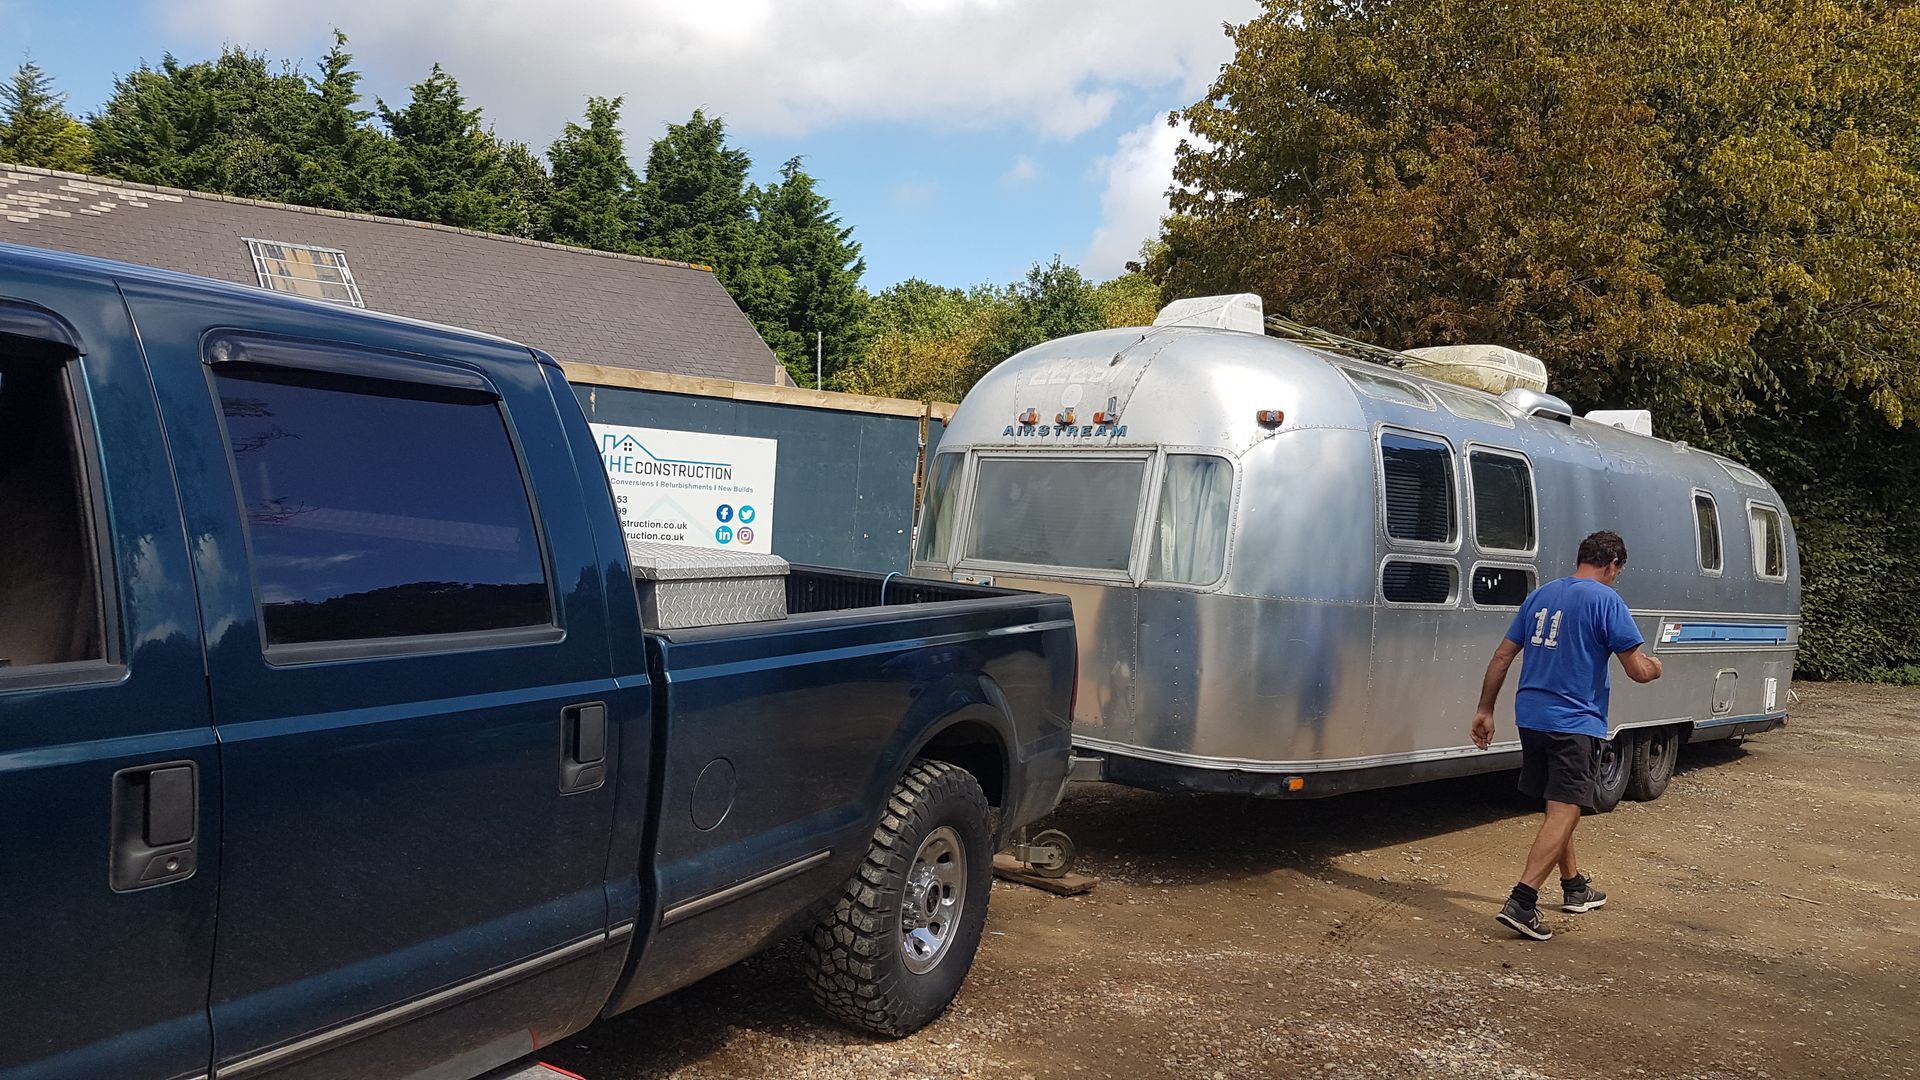 Airstream delivery from Amazing Airstreams to Wales